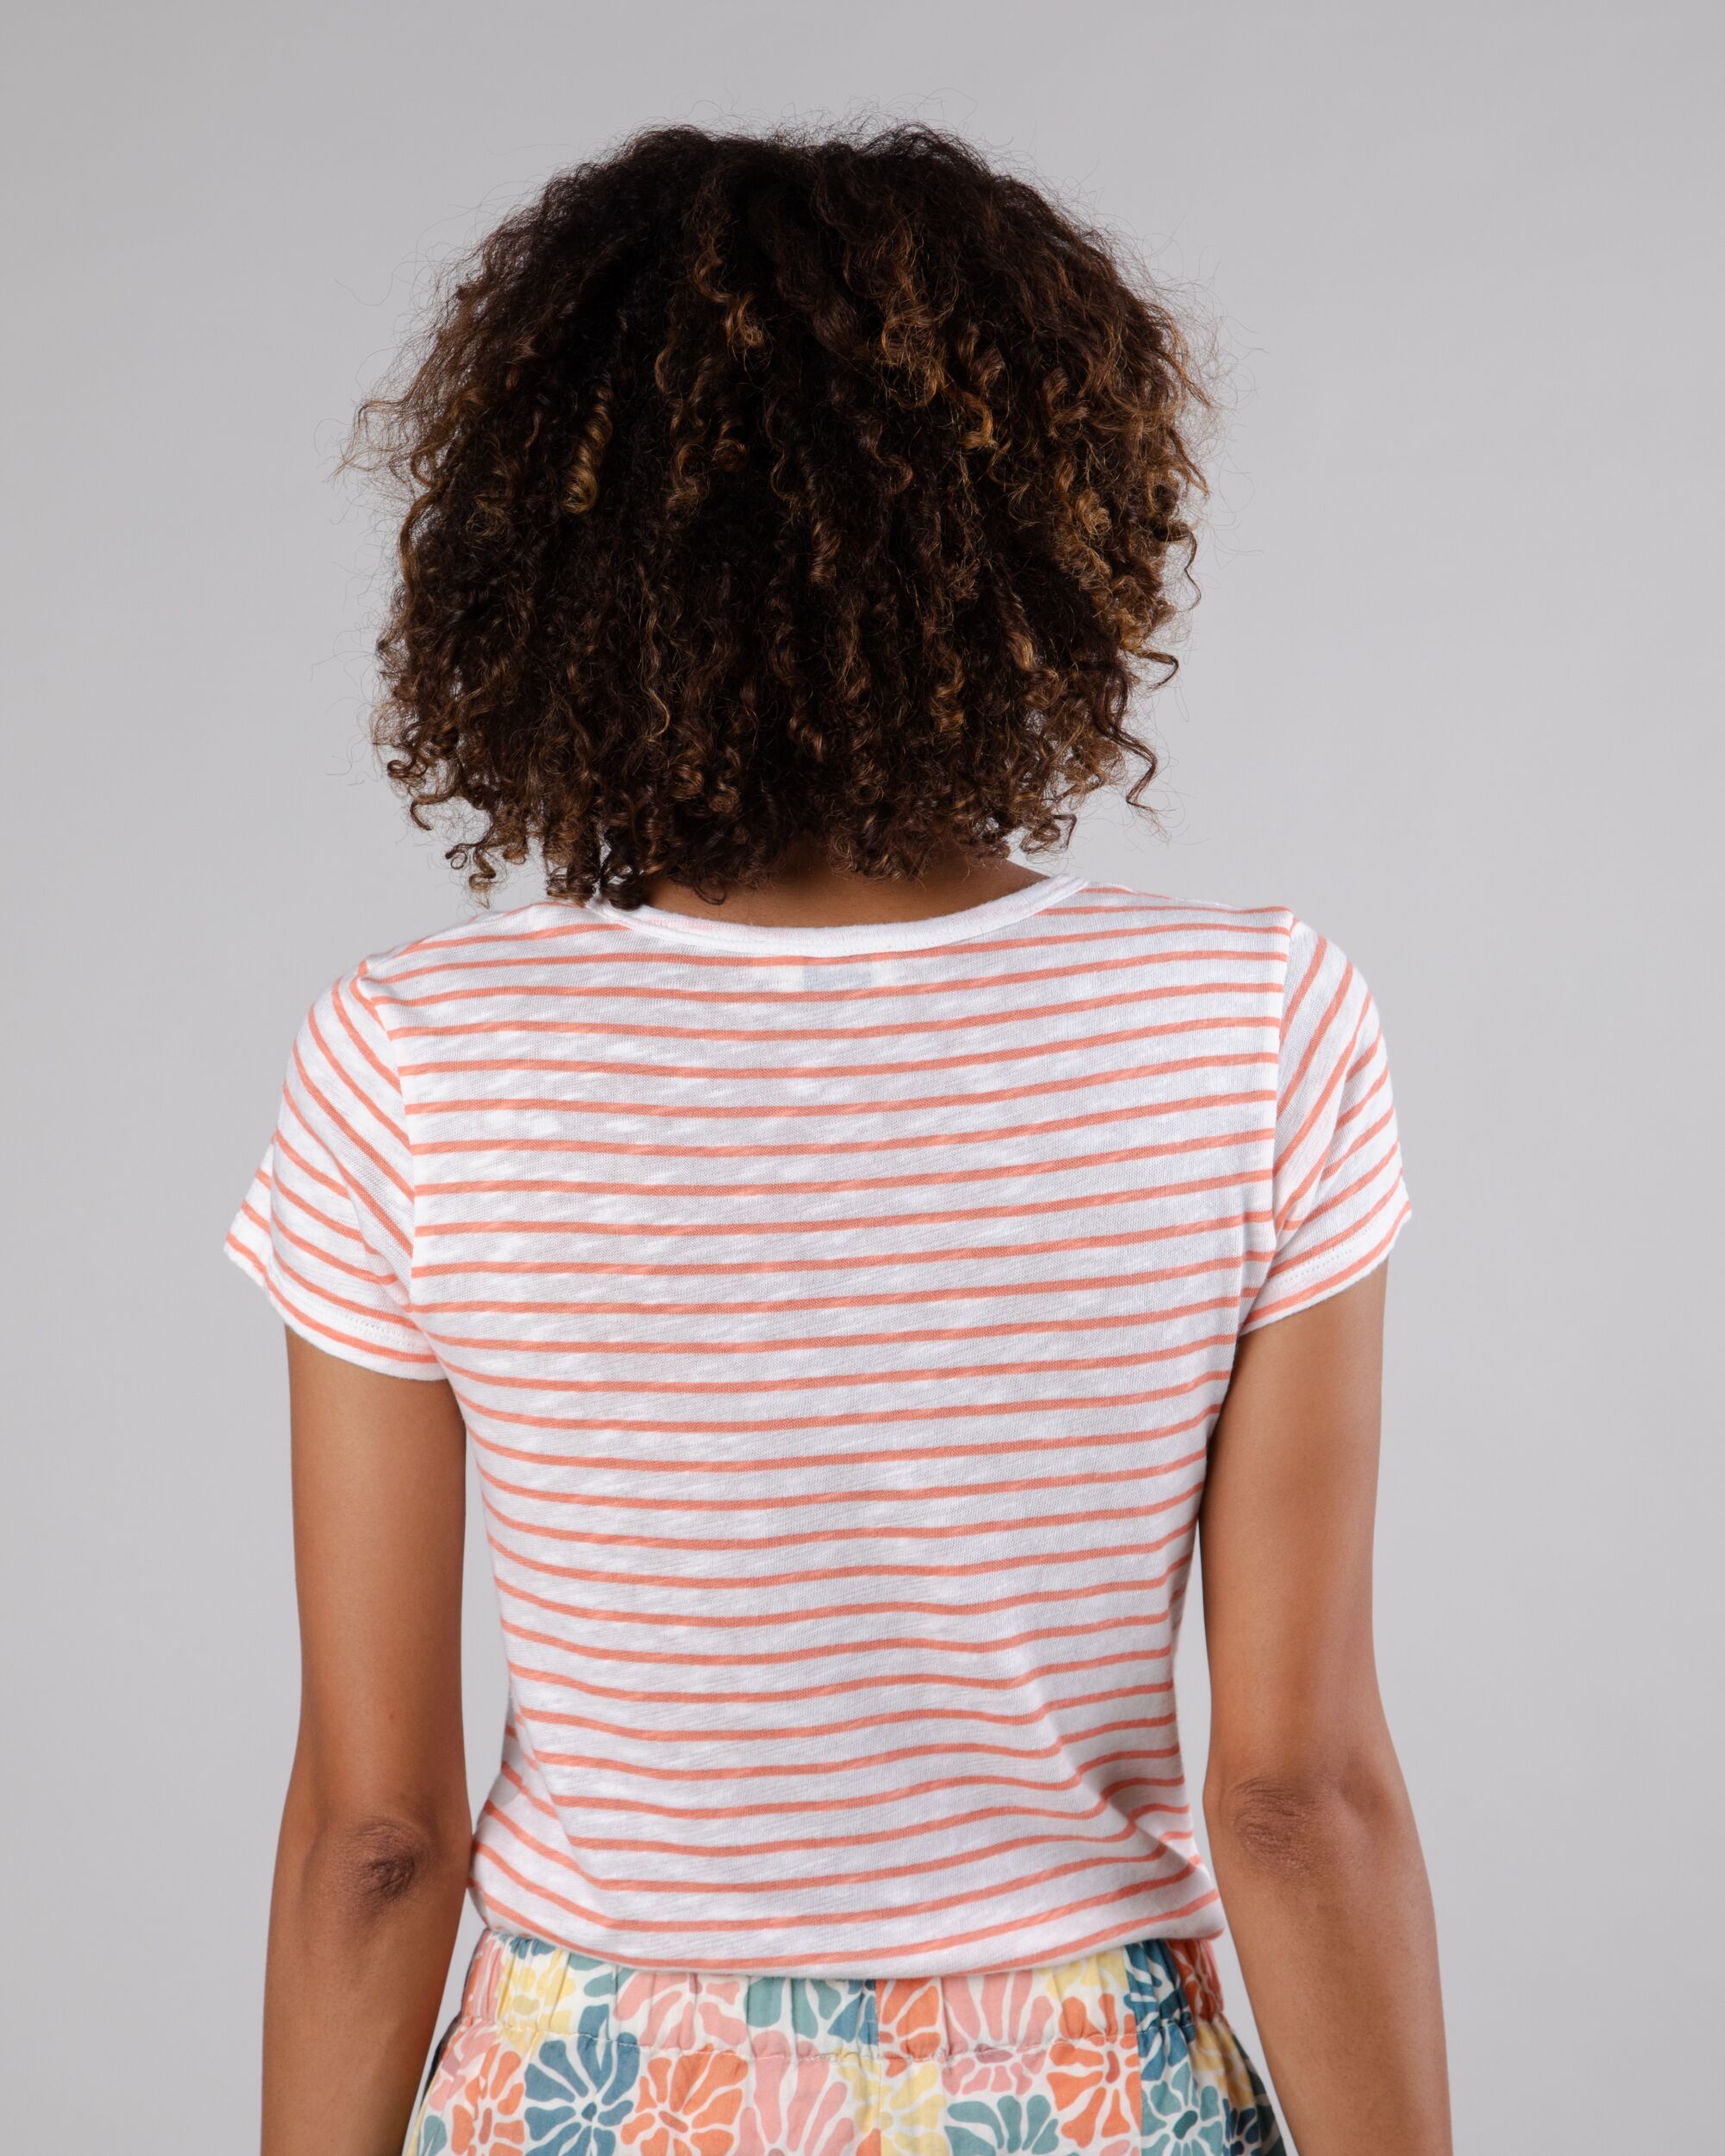 T-shirt Stripes in coral-white stripes made from organic cotton from Brava Fabrics